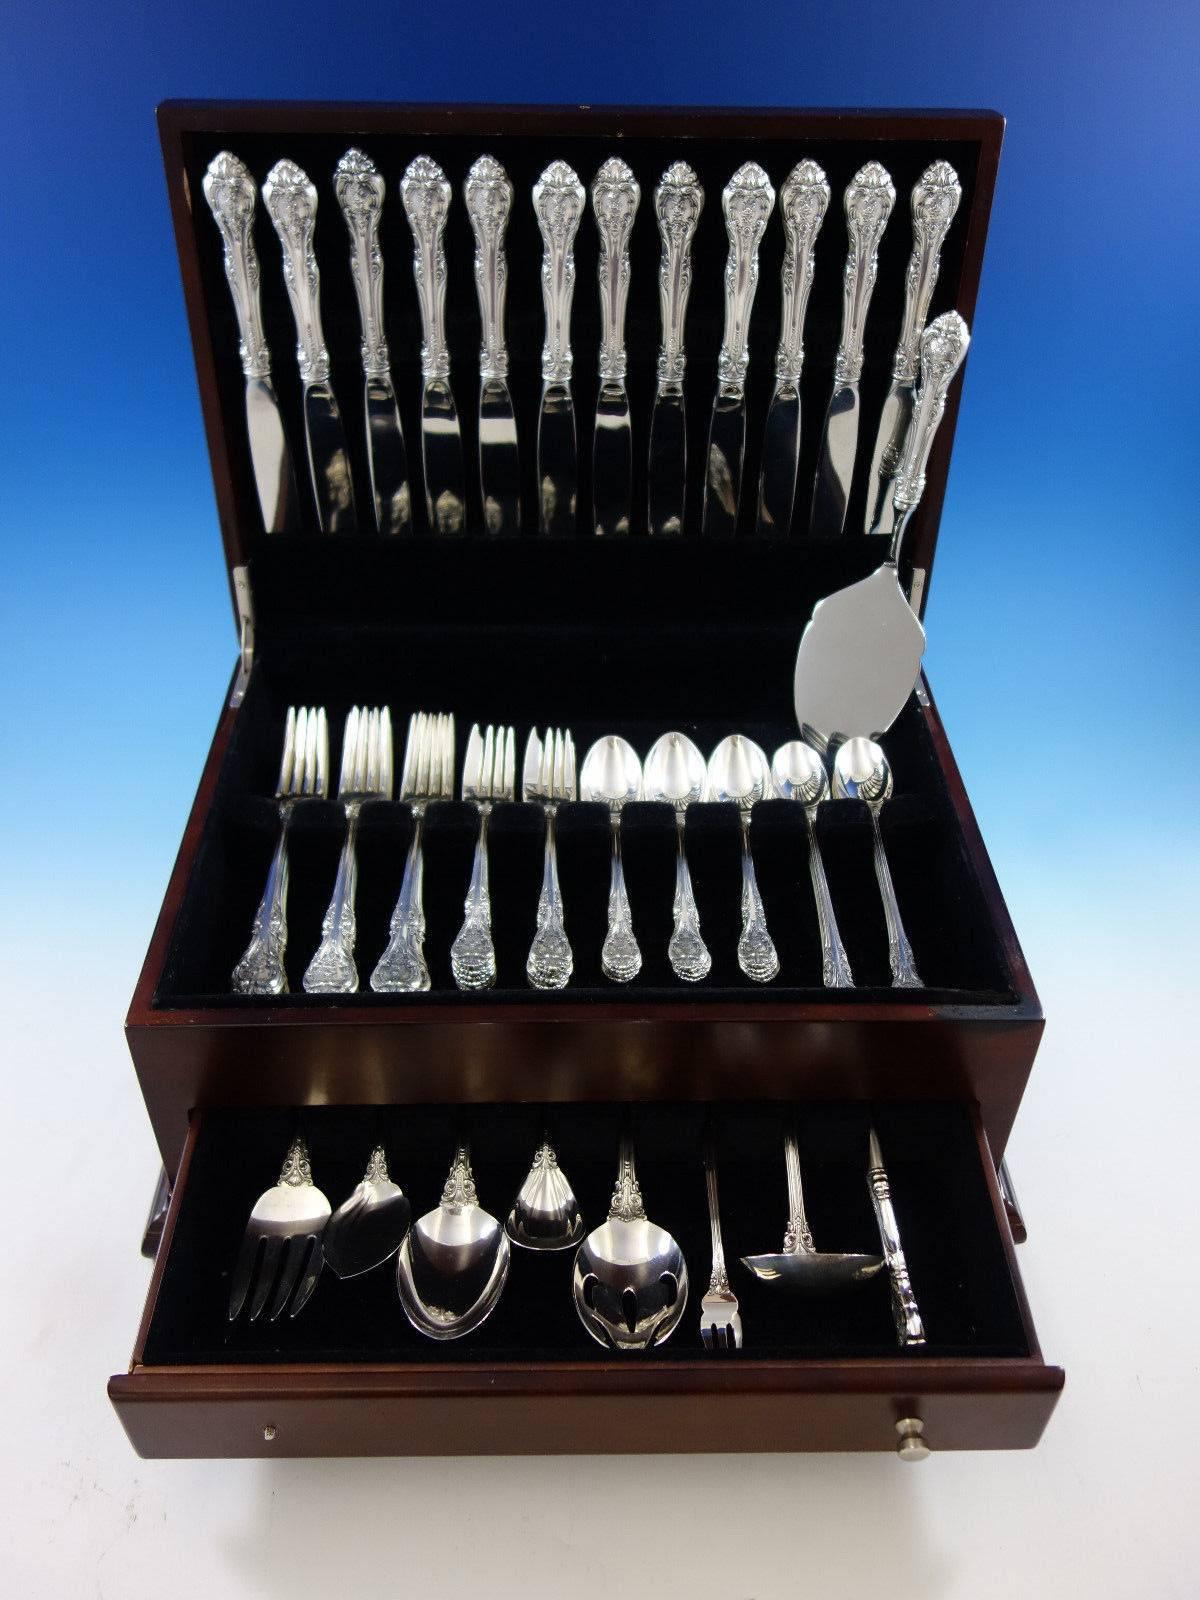 Dinner size king Edward by Gorham sterling silver flatware set - 69 pieces. This set includes: 

12 dinner size knives, 9 3/4